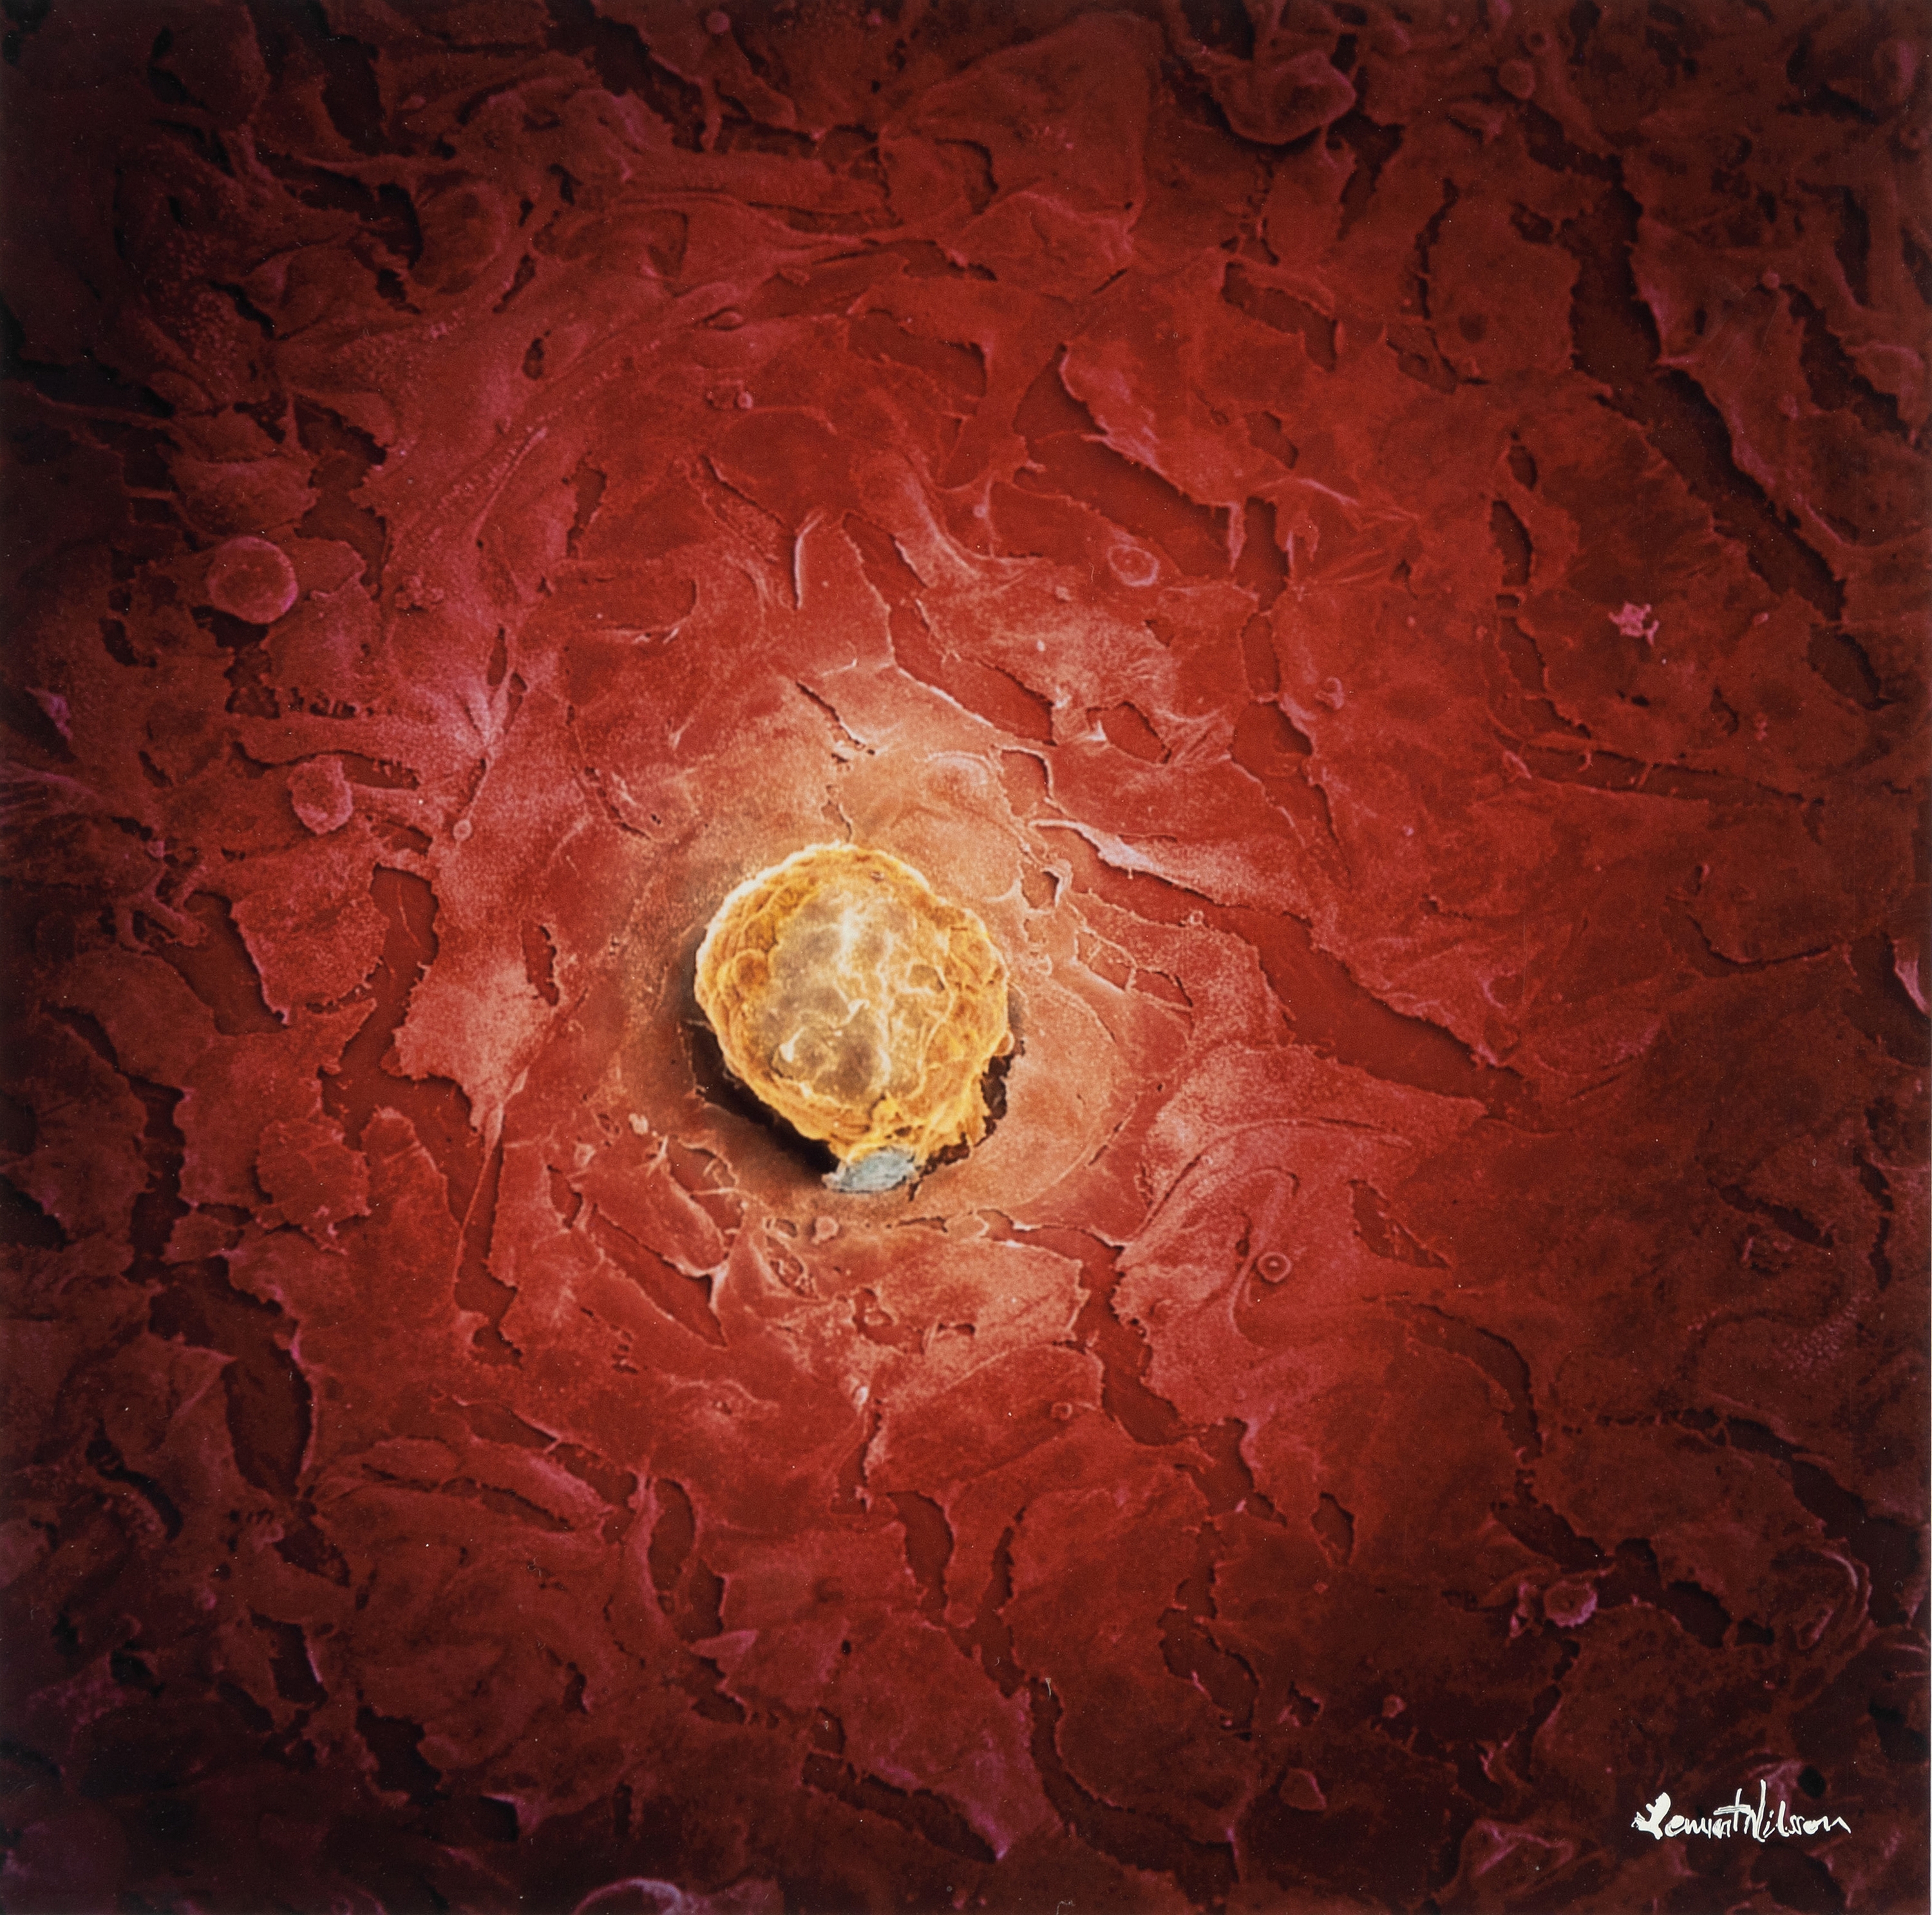 Impregnated human egg cell by Lennart Nilsson, 1990